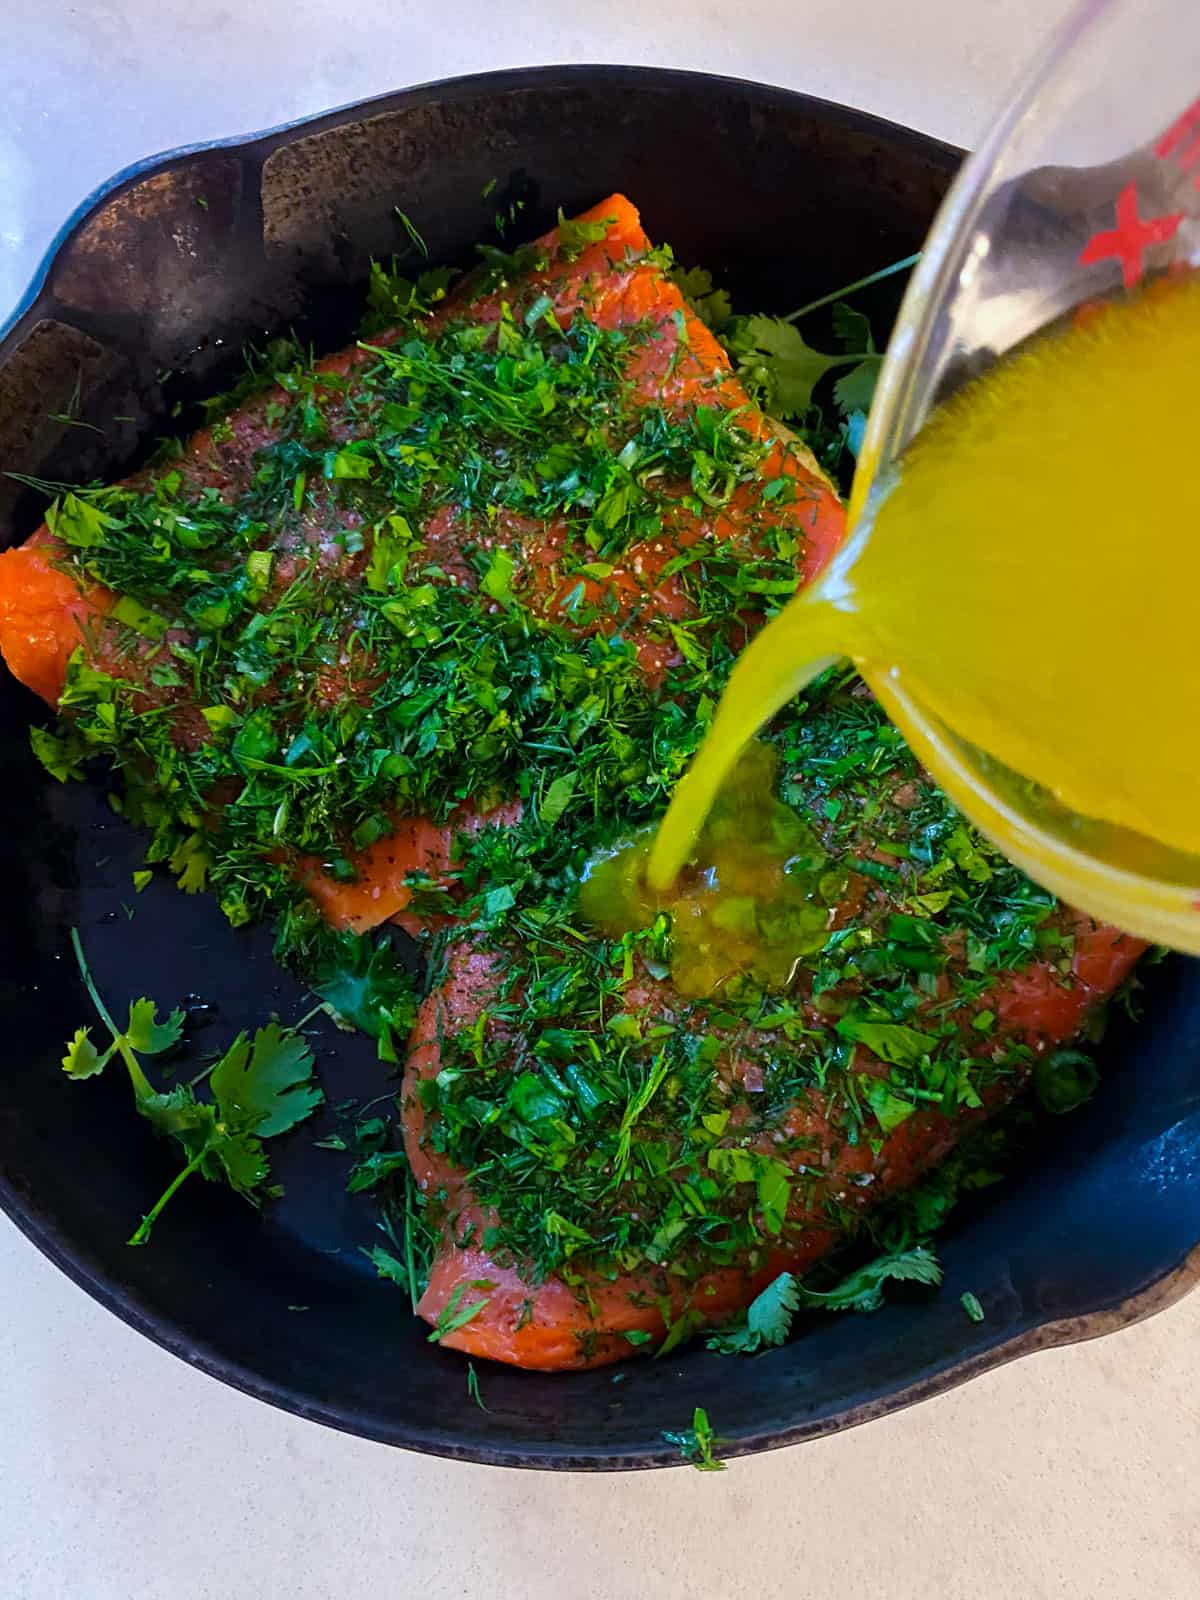 Pour the white wine and olive oil mixture around the herb salmon and pour some on top as well.